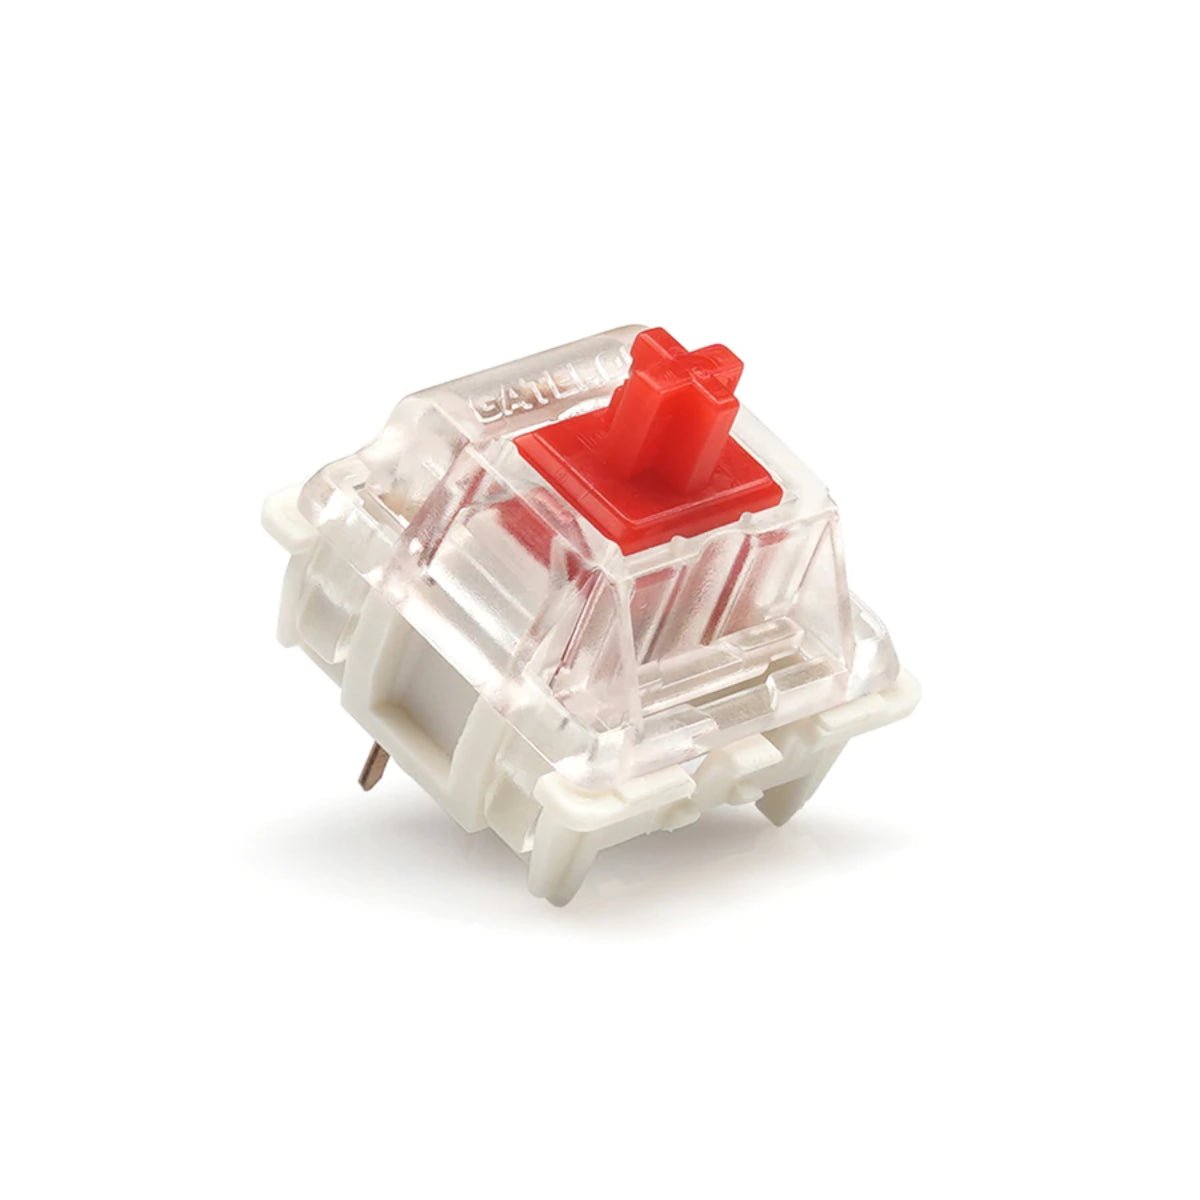 KBD Fans Gateron SMD Liner Switches - Red - Store 974 | ستور ٩٧٤